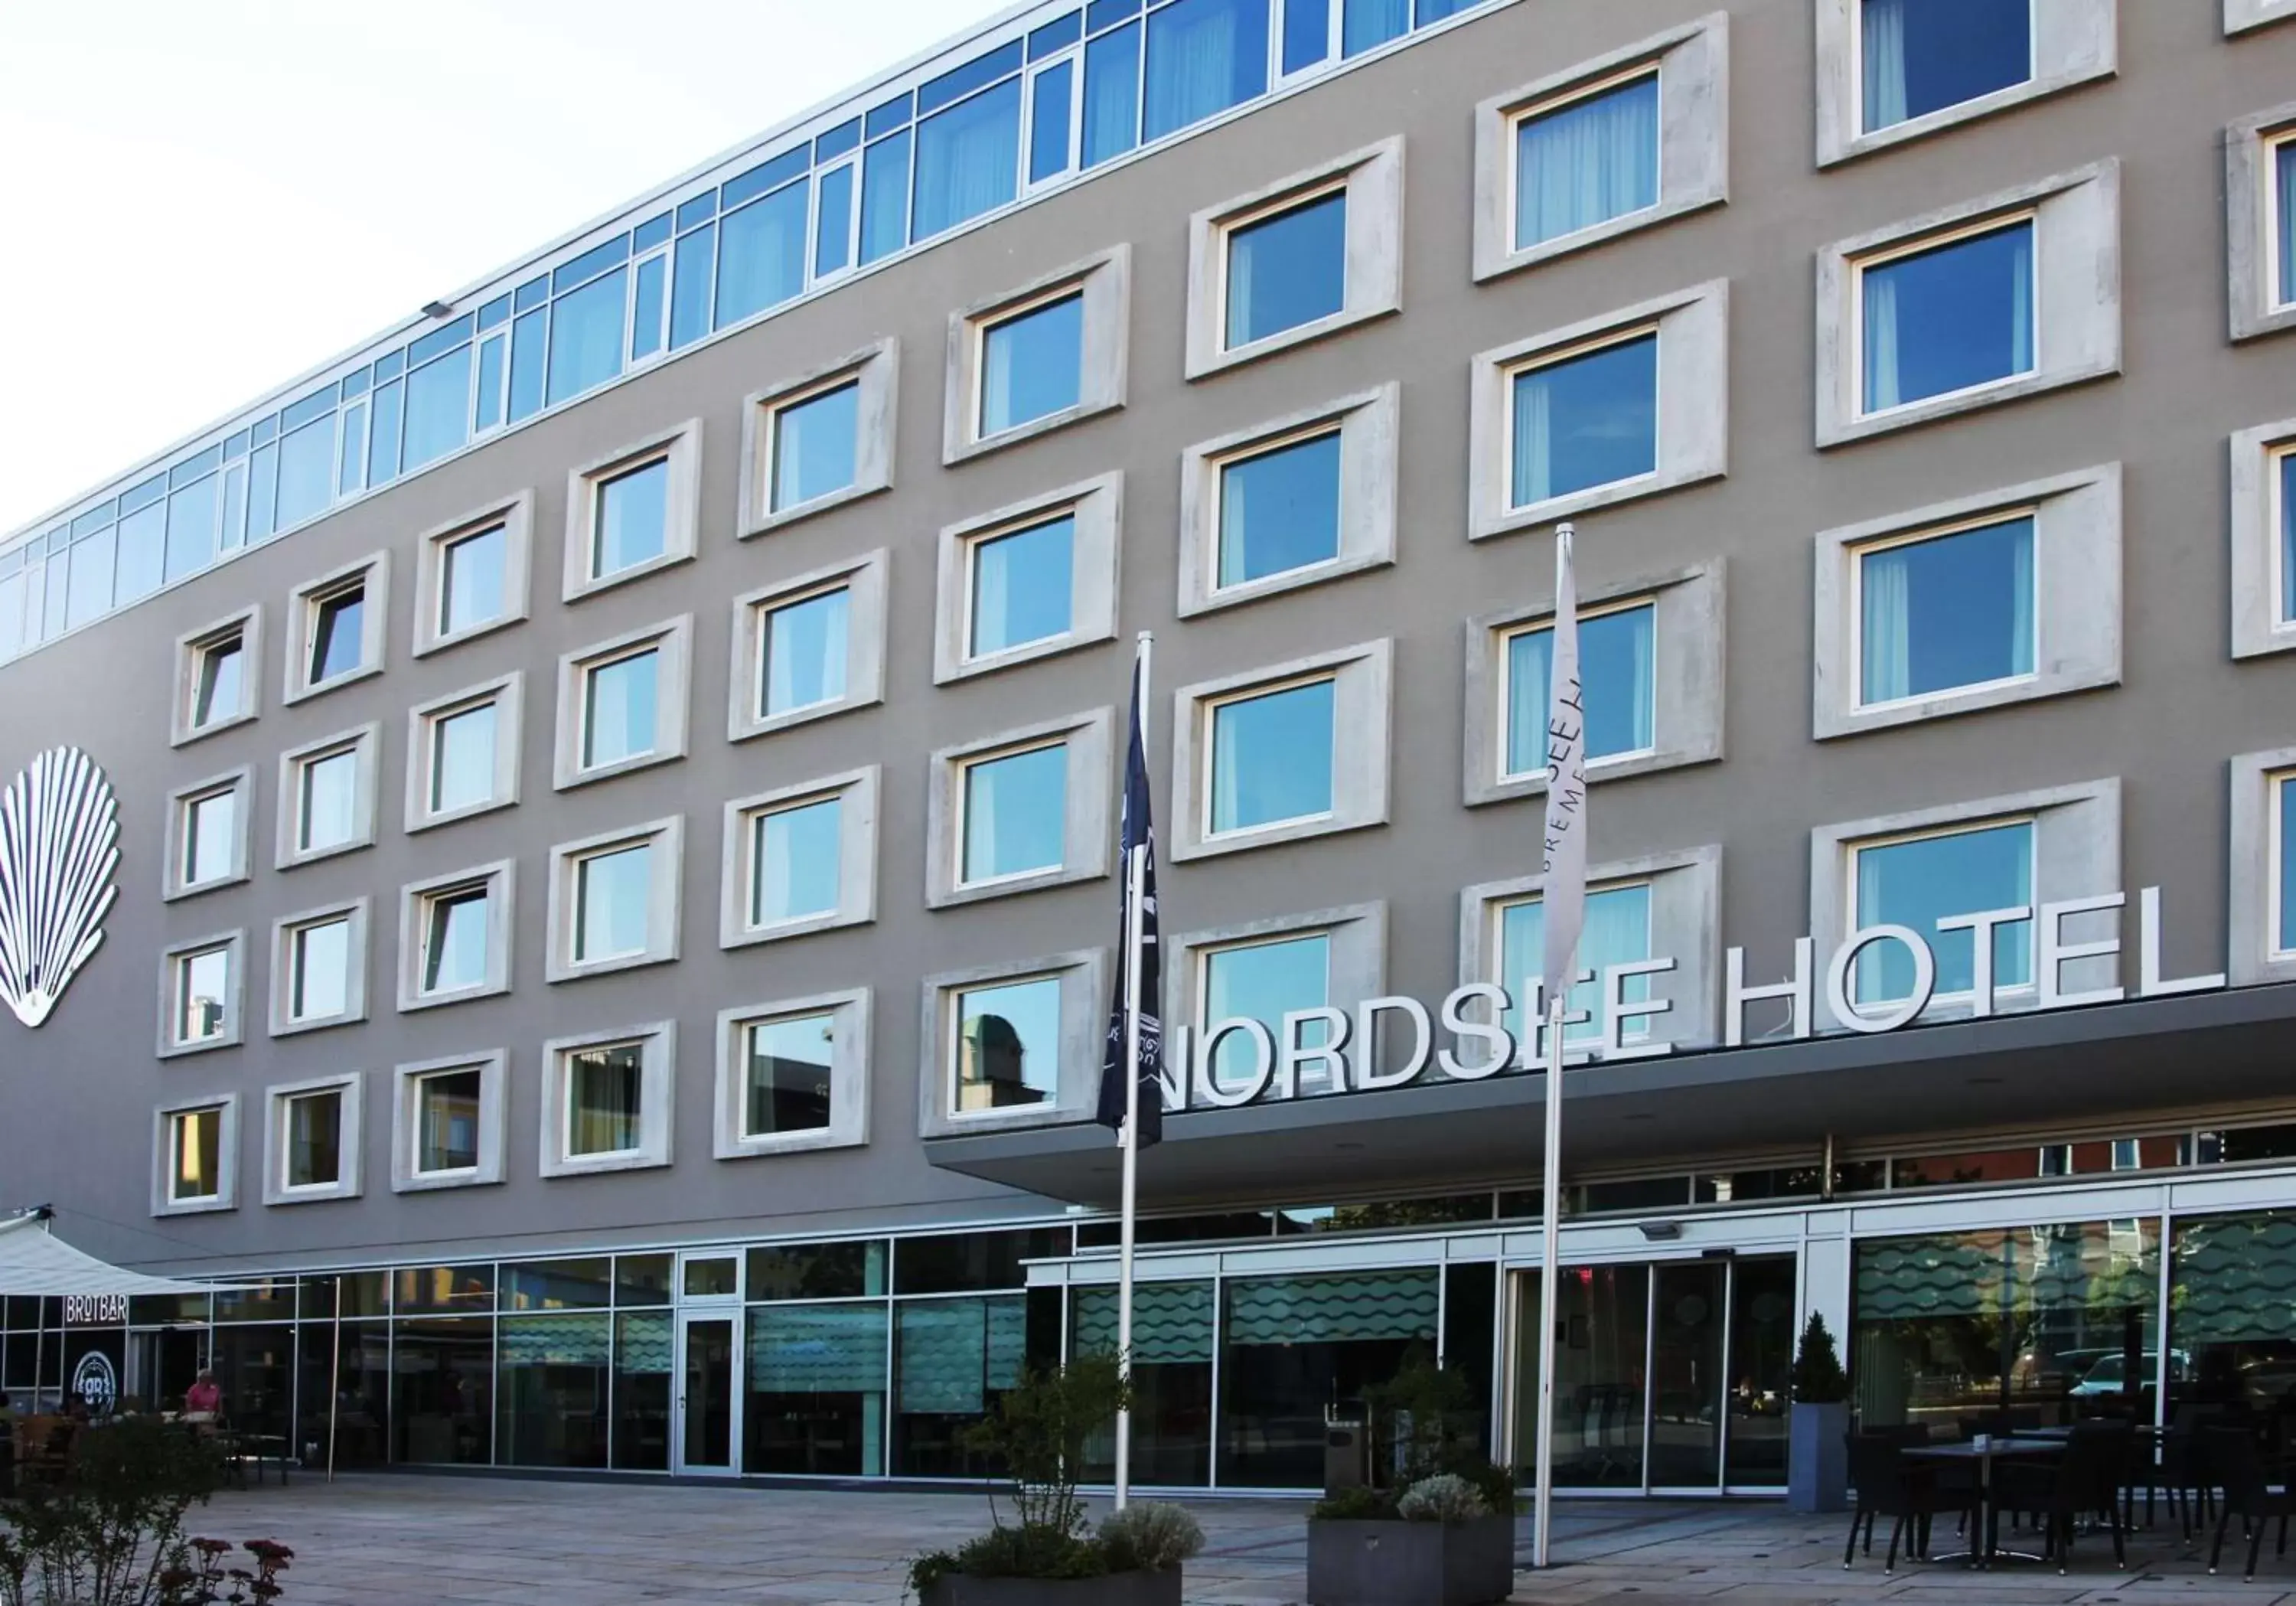 Property Building in Nordsee Hotel City